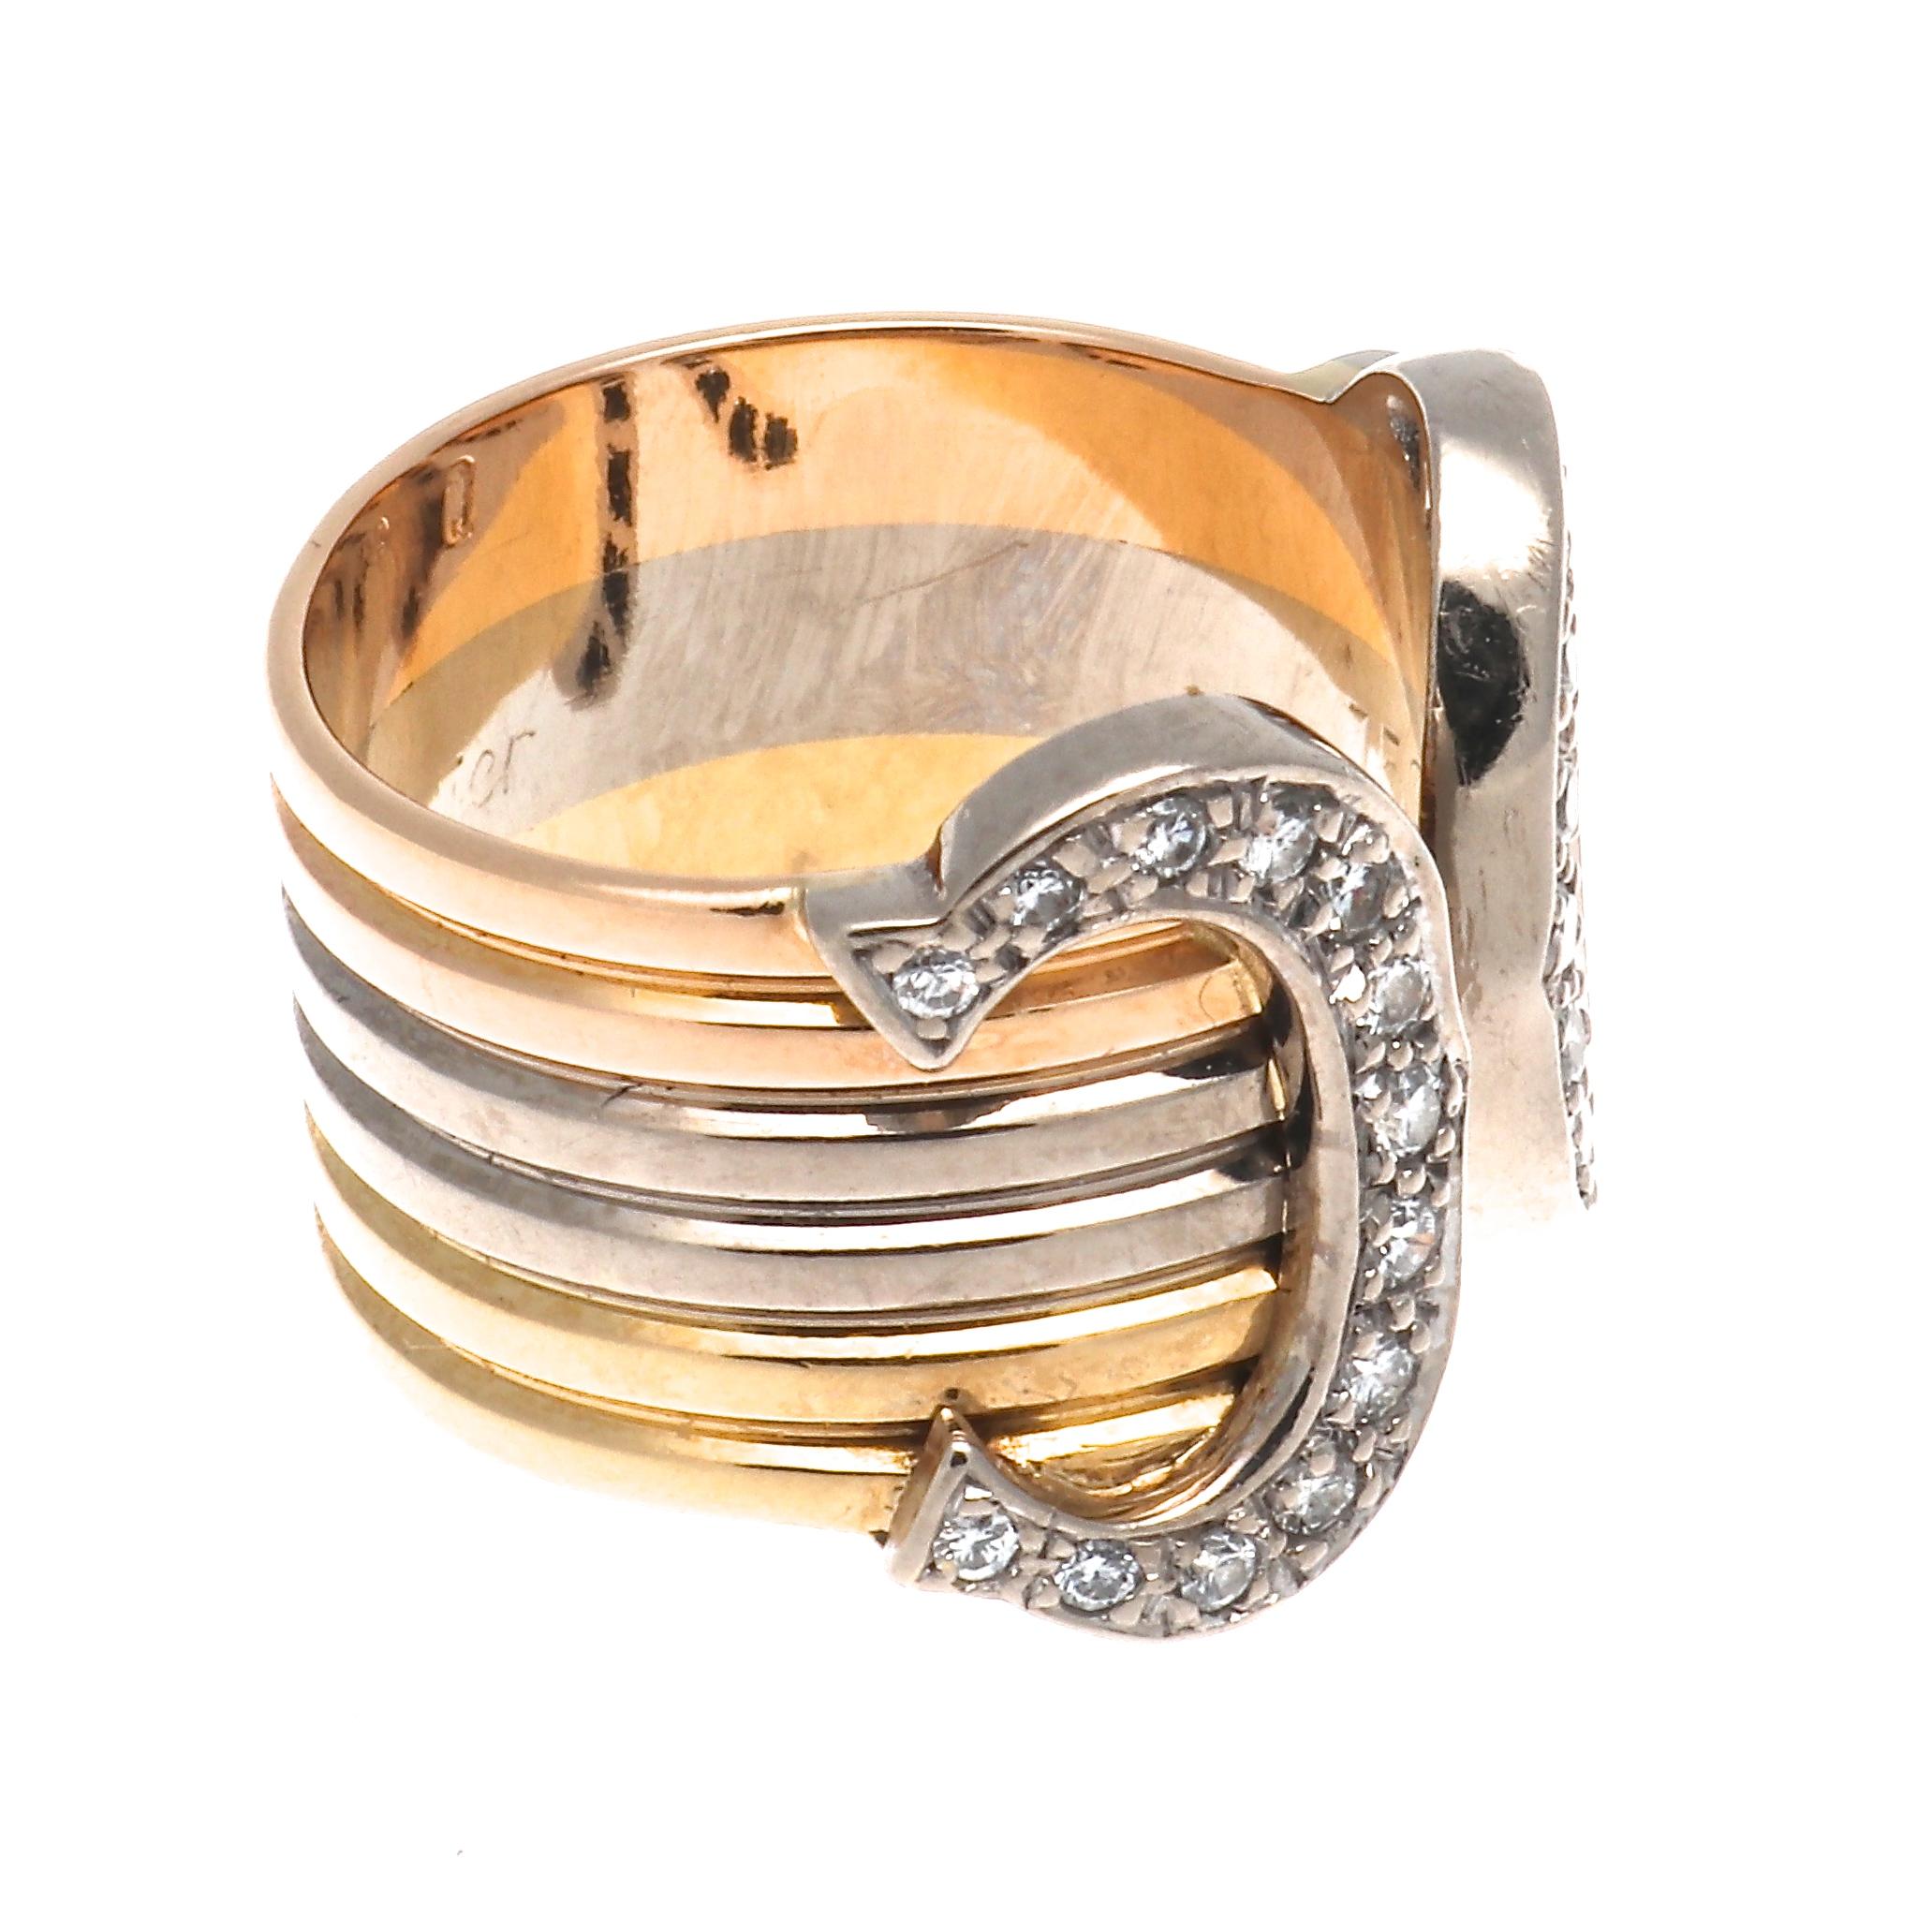 Cartier signature C ring bestows pure elegance. A discreet initial of such unique purity. Featuring C's of diamonds wrapped in a tricolor gold band. Signed Cartier, serial number.

Ring size 48 or 4-1/2.